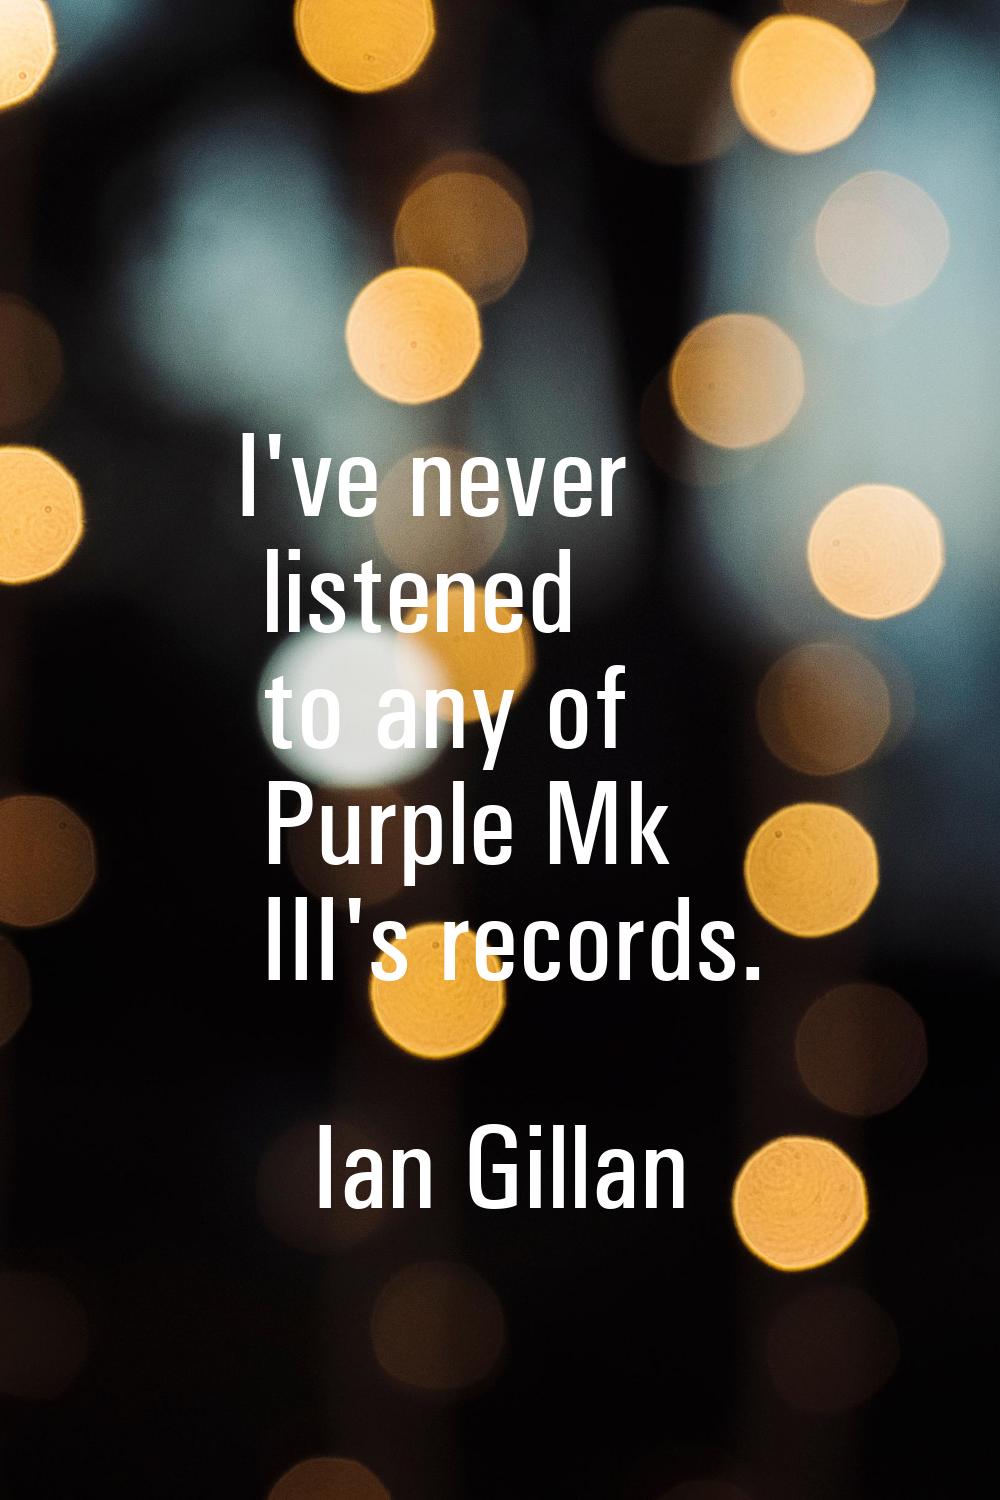 I've never listened to any of Purple Mk III's records.